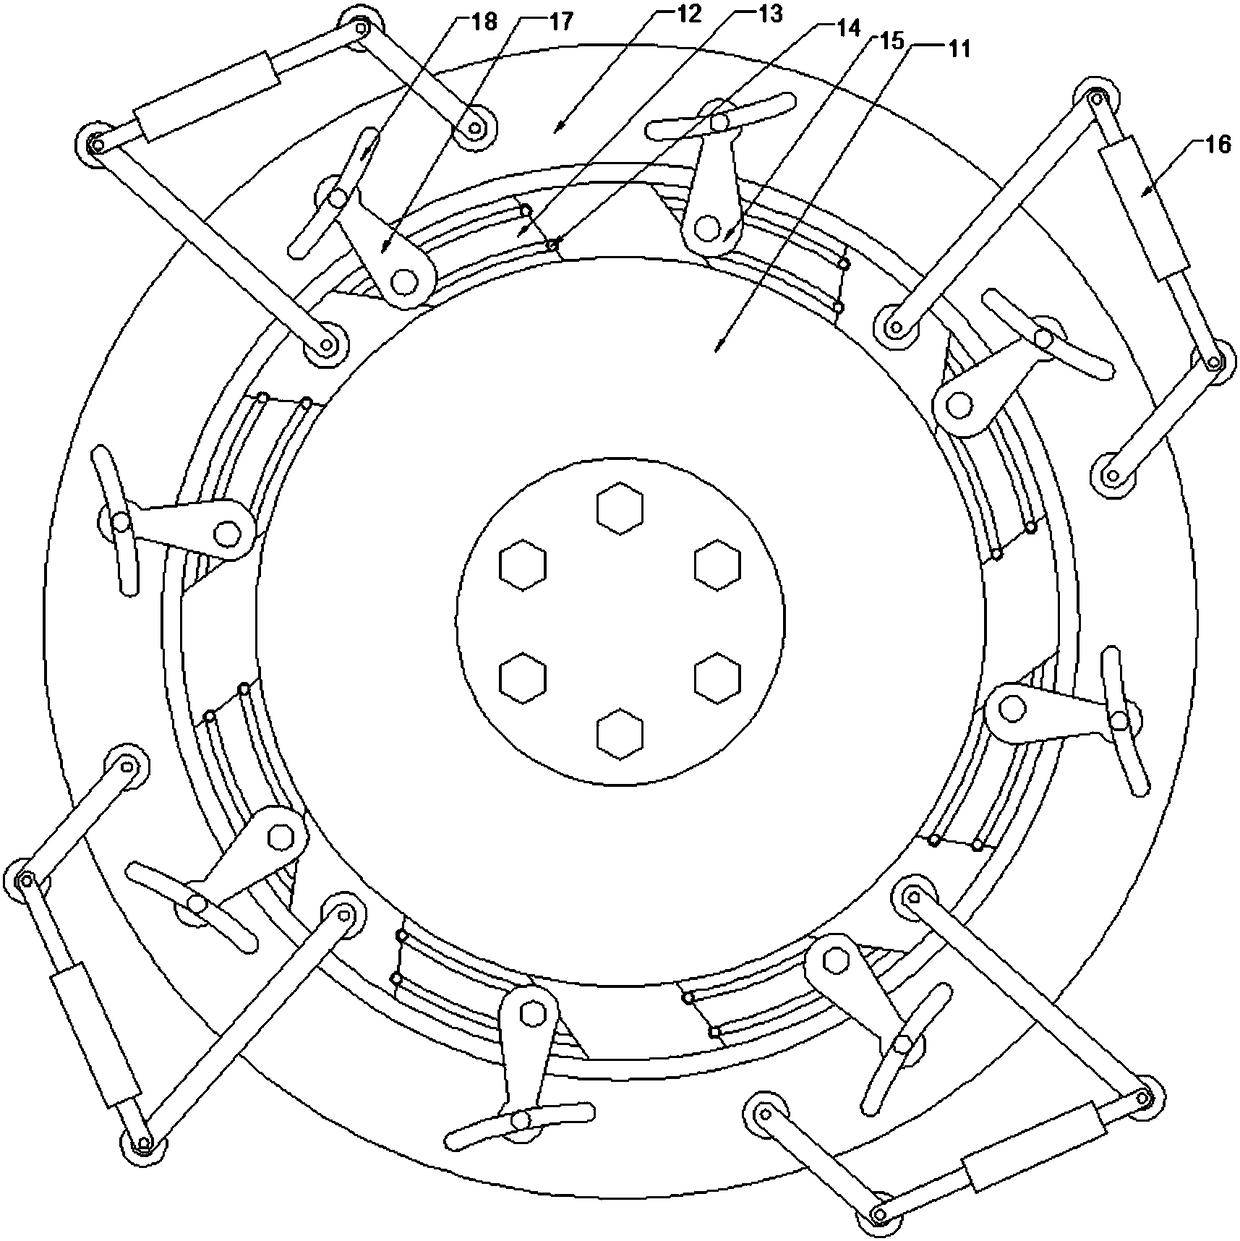 Pressure-bearing rotary support device for construction